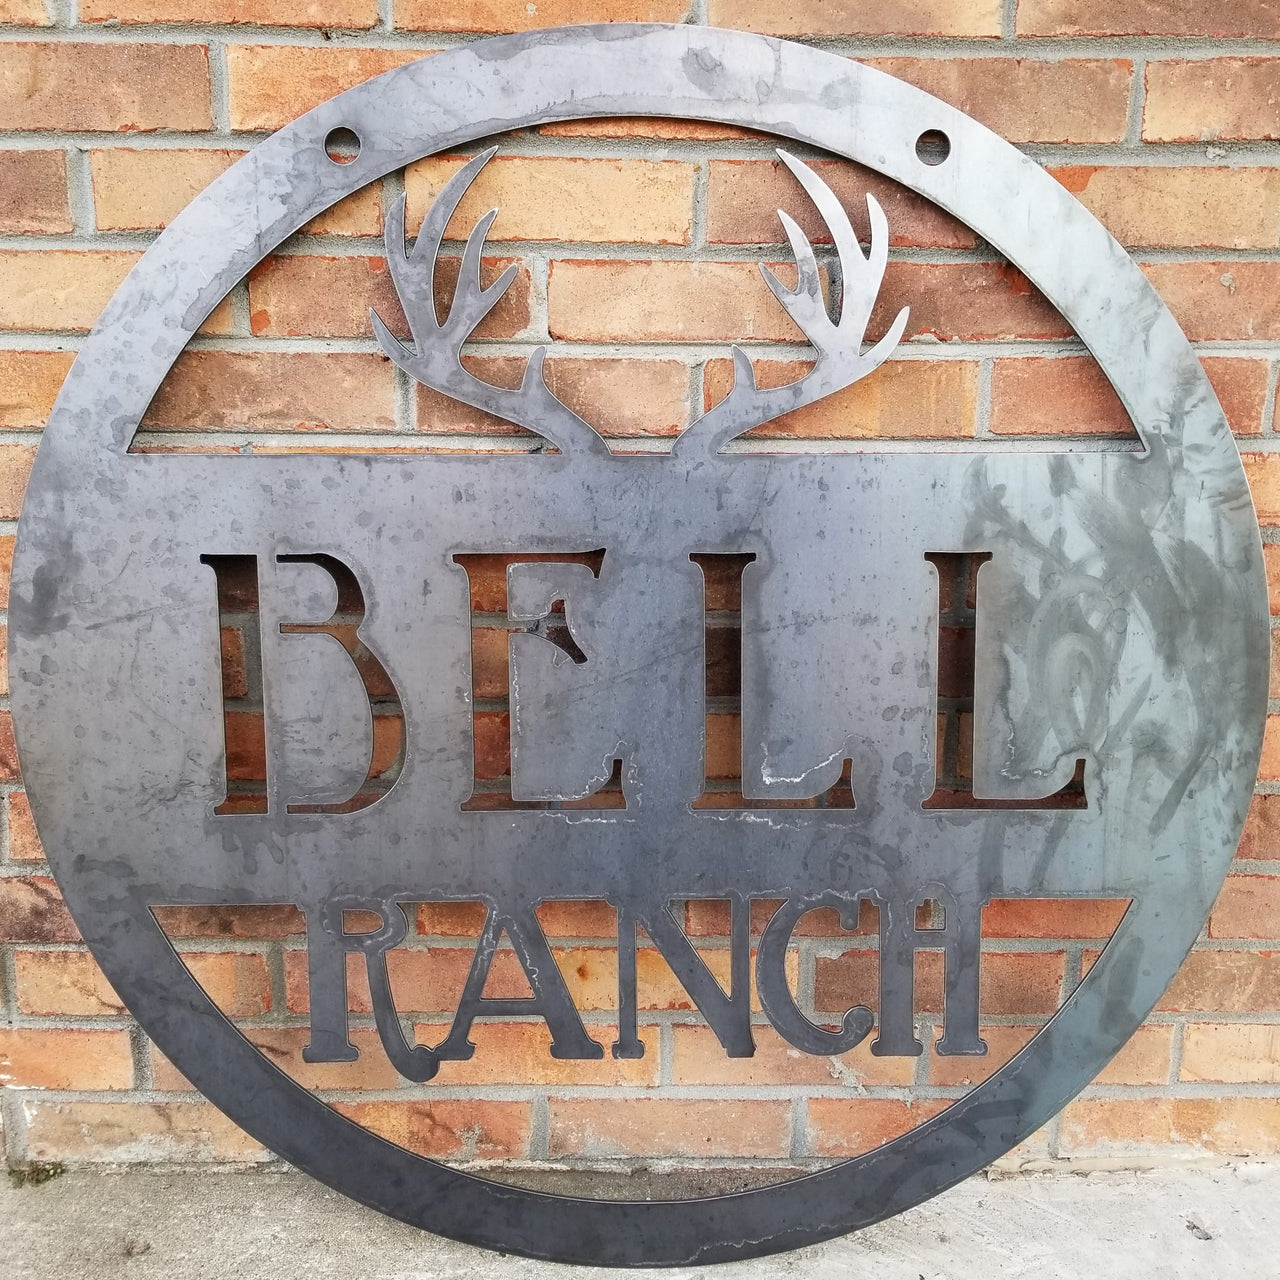 Round metal sign with an image of antlers at the top and two lines of text which read, "Bell Ranch"